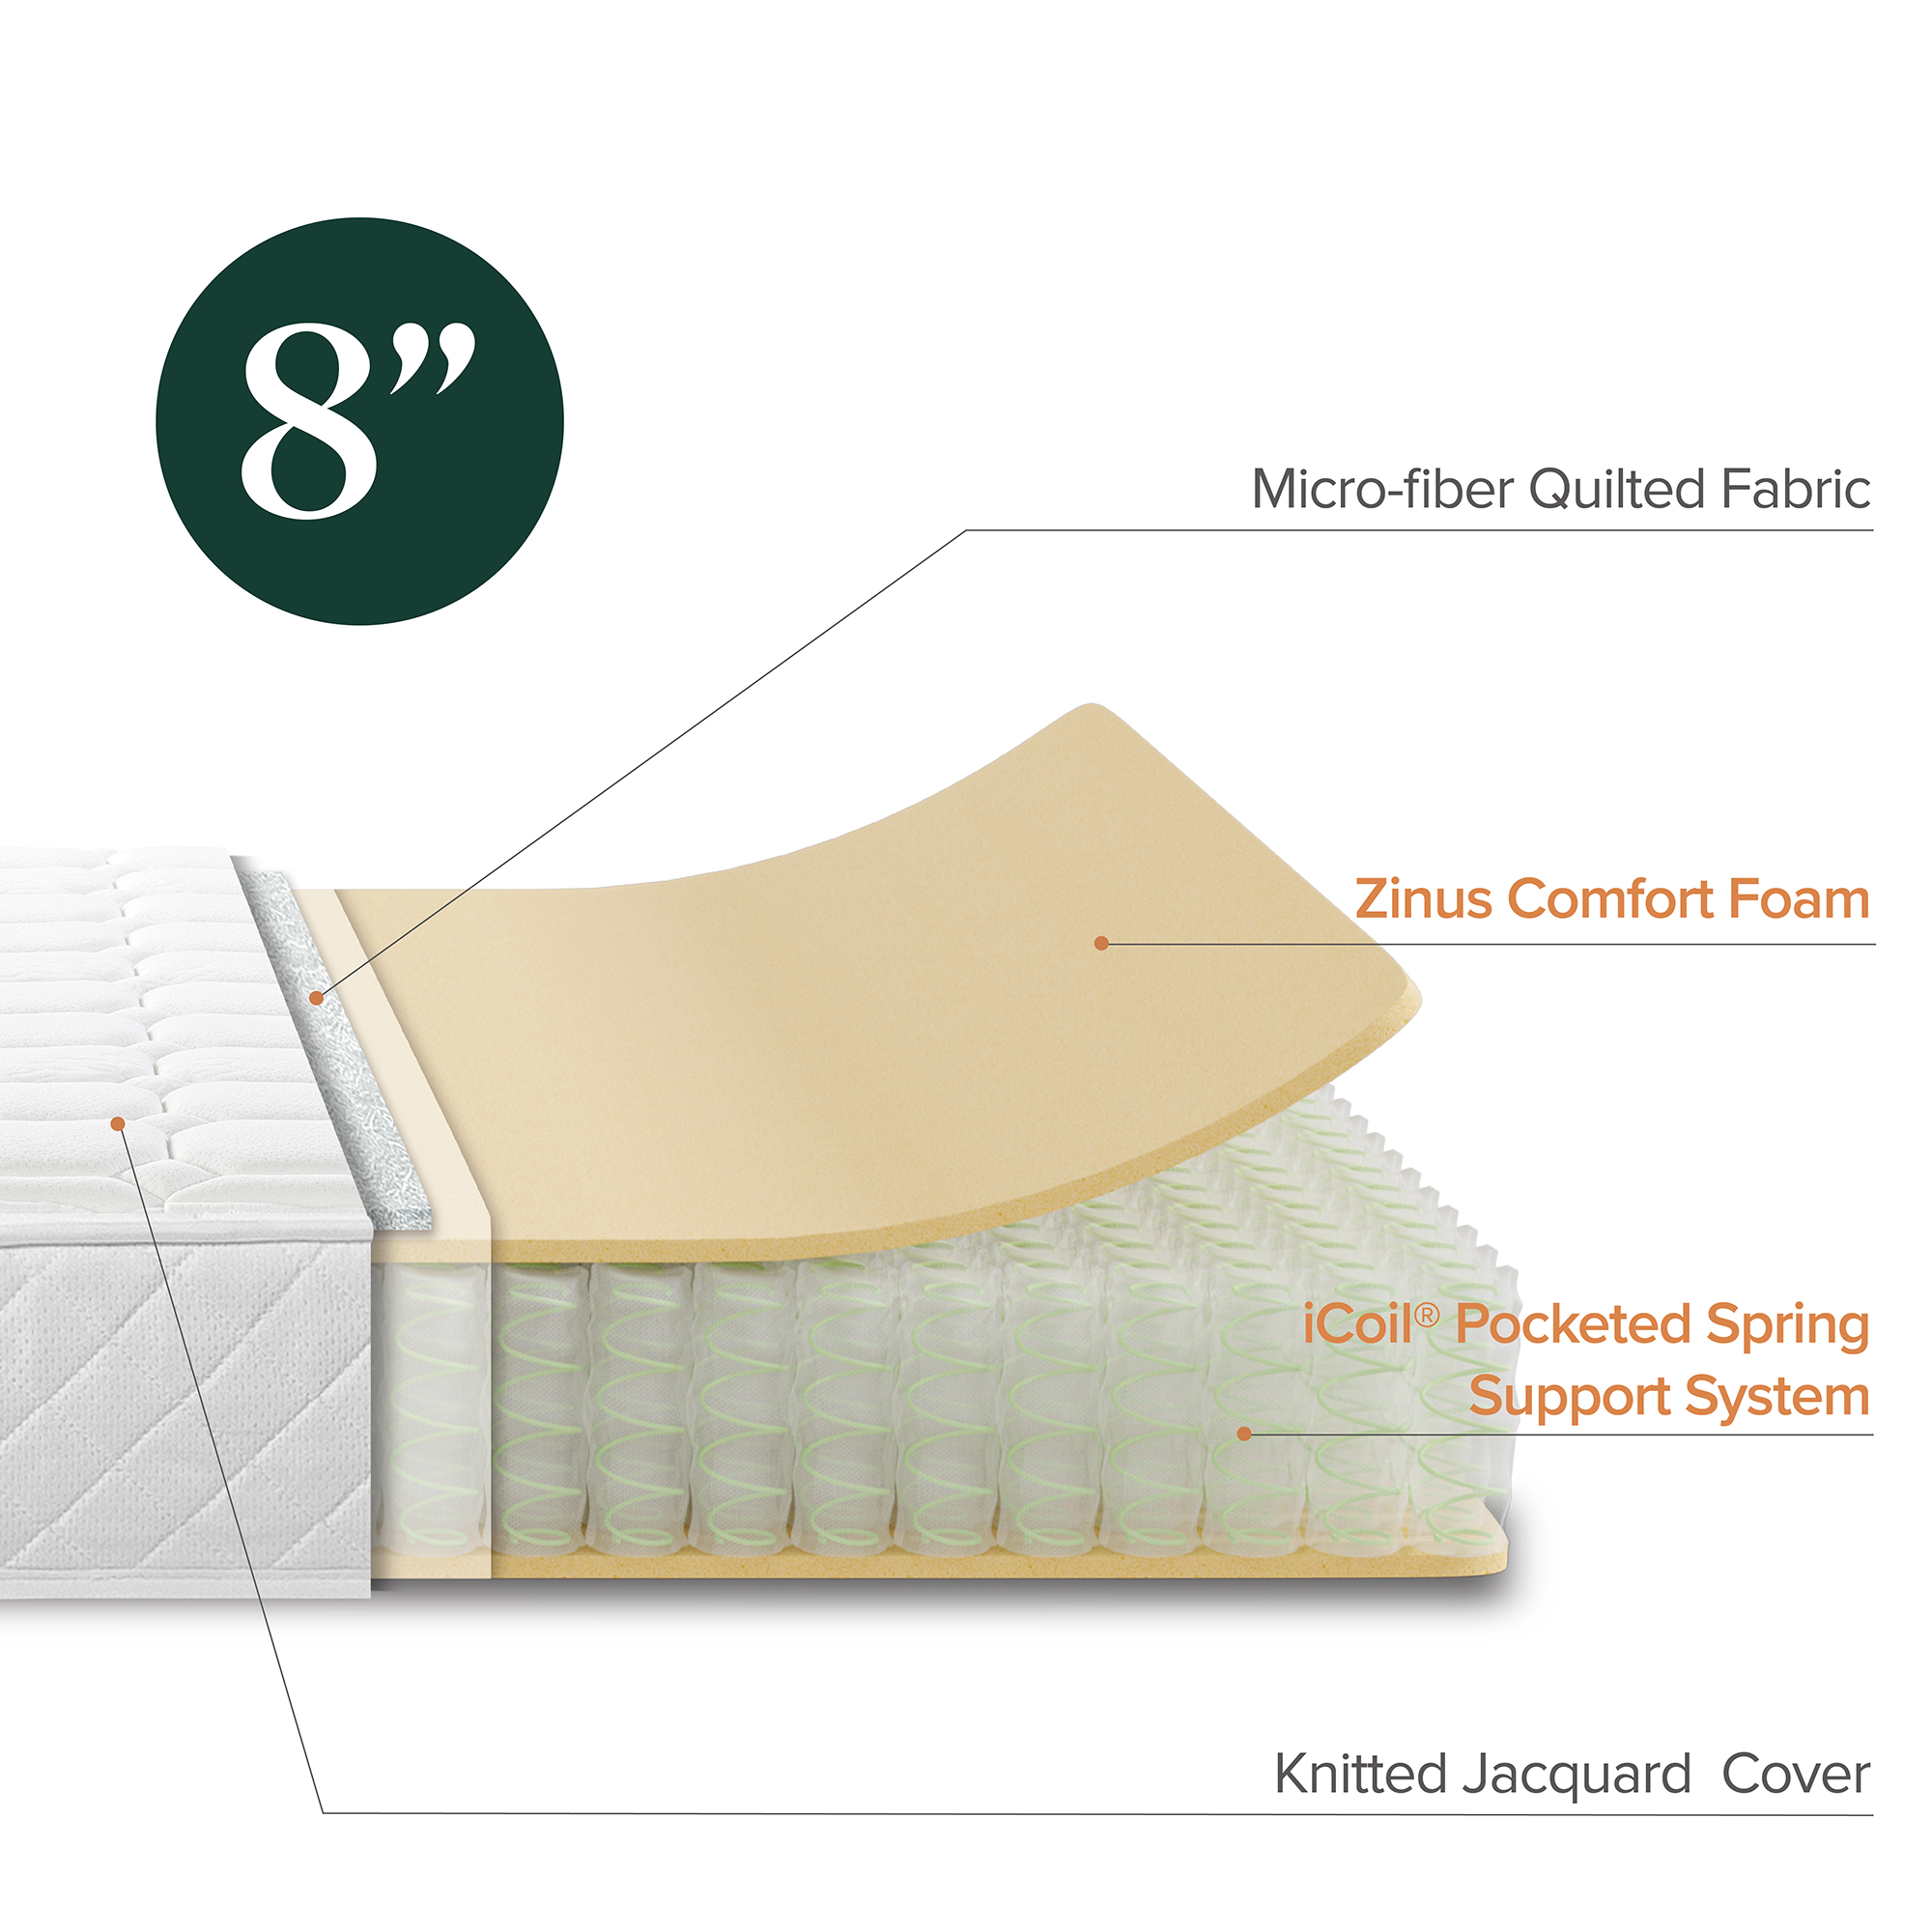 Zinus 8" Quilted Hybrid Mattress of Comfort Foam and Pocket Spring, Adult, Queen - image 5 of 9